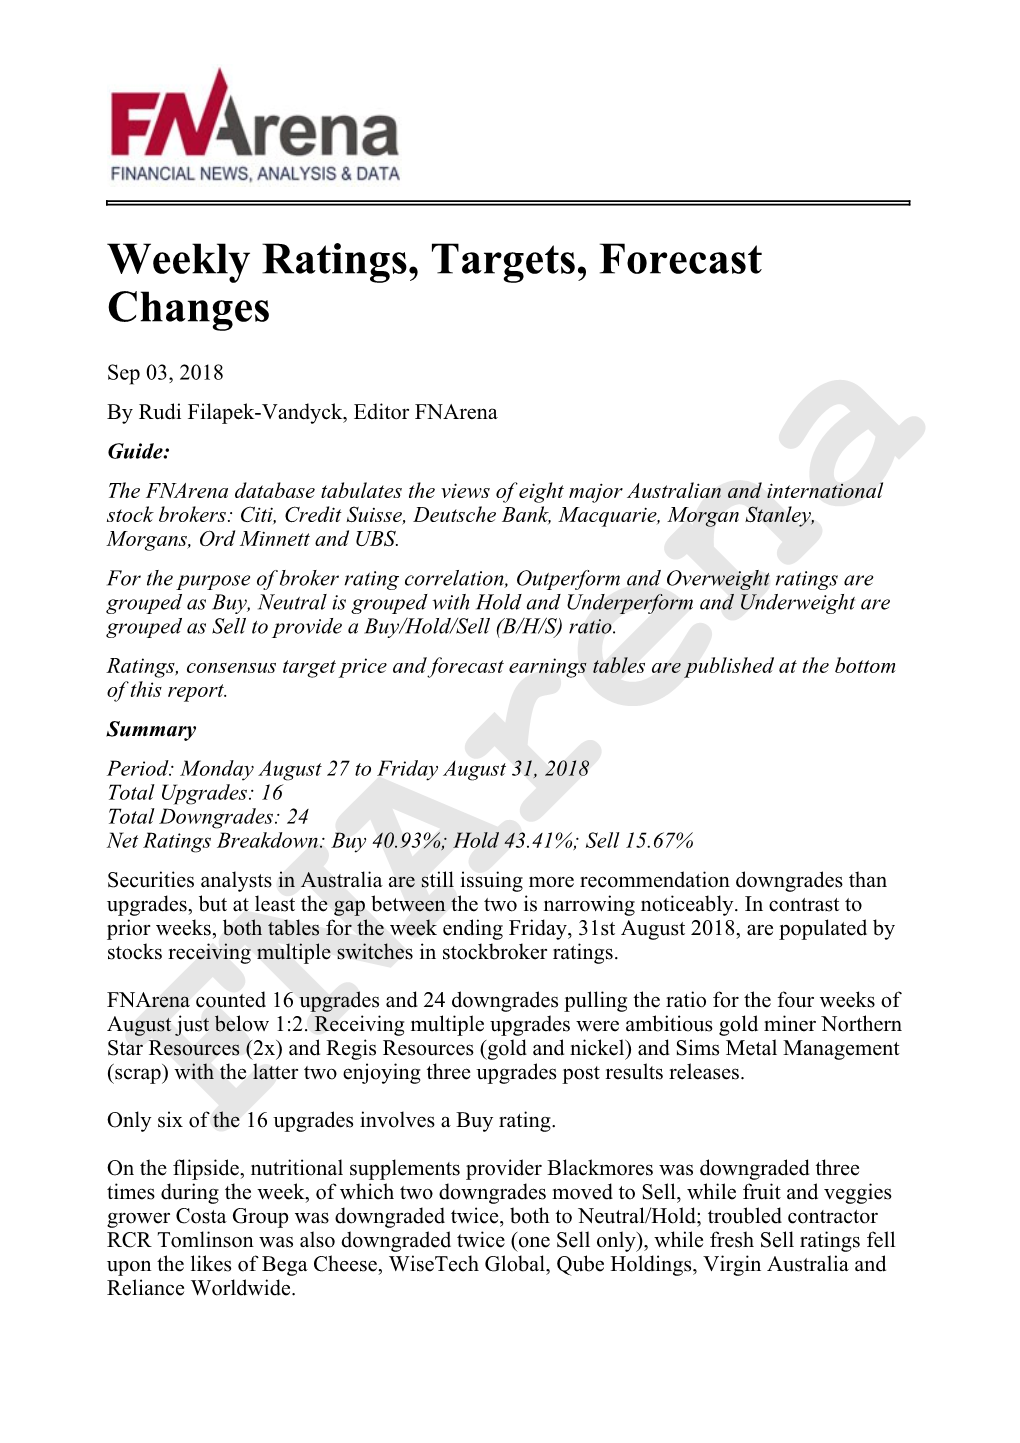 Weekly Ratings, Targets, Forecast Changes